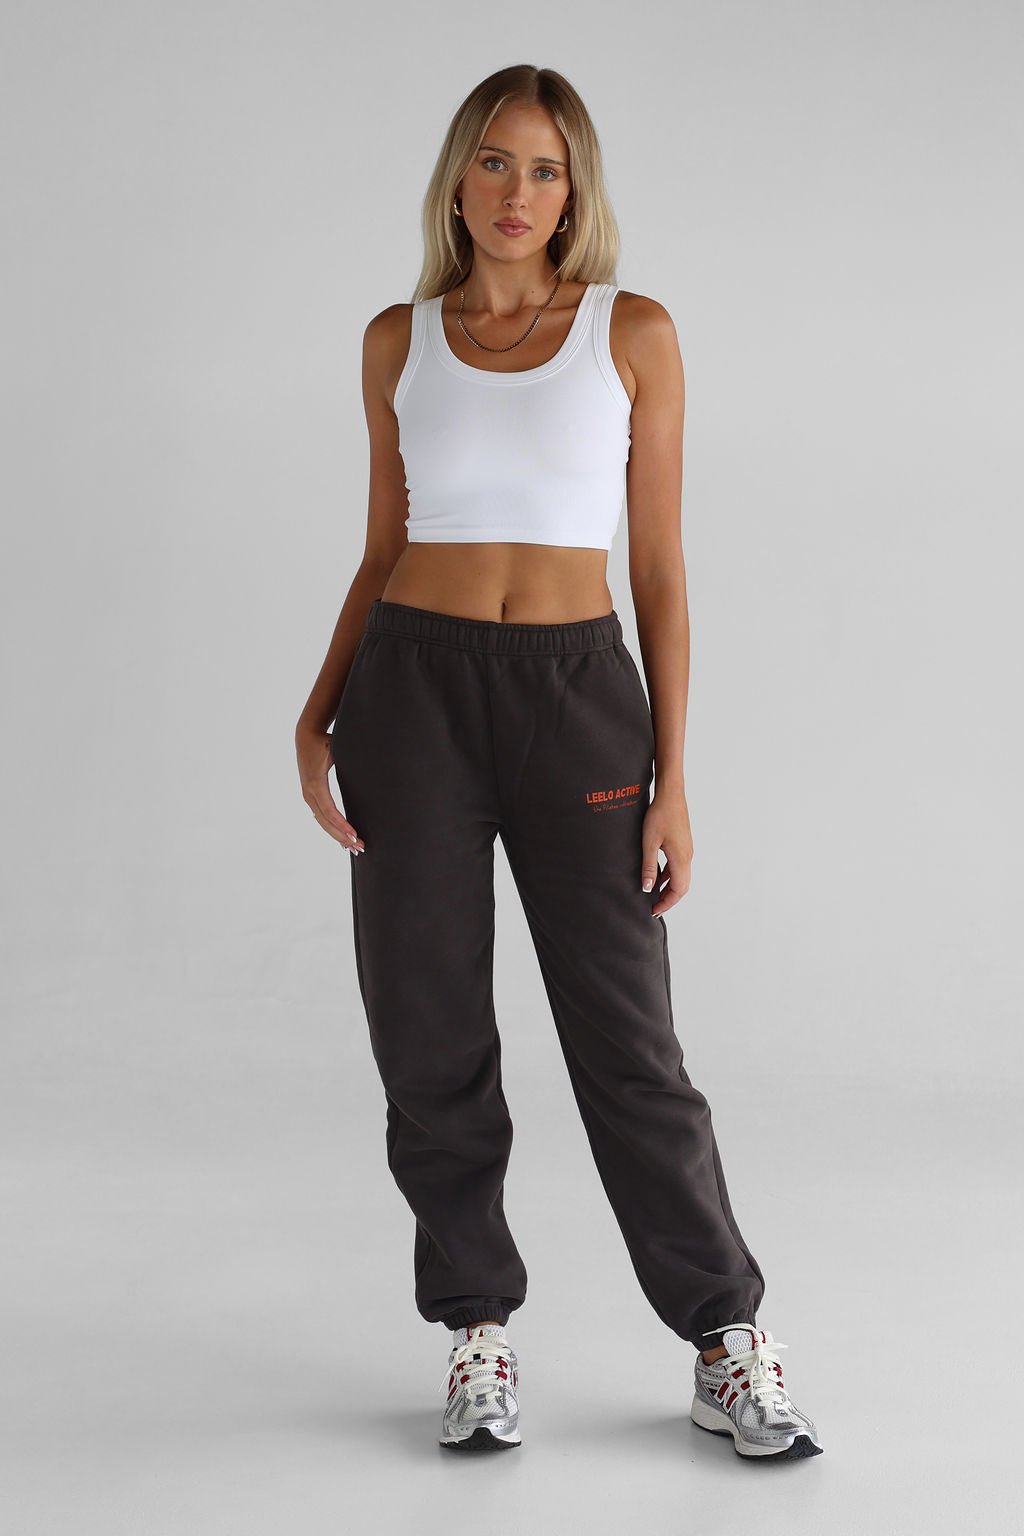 The Pilates Collection Cuffed Sweatpants - Ash - LEELO ACTIVE